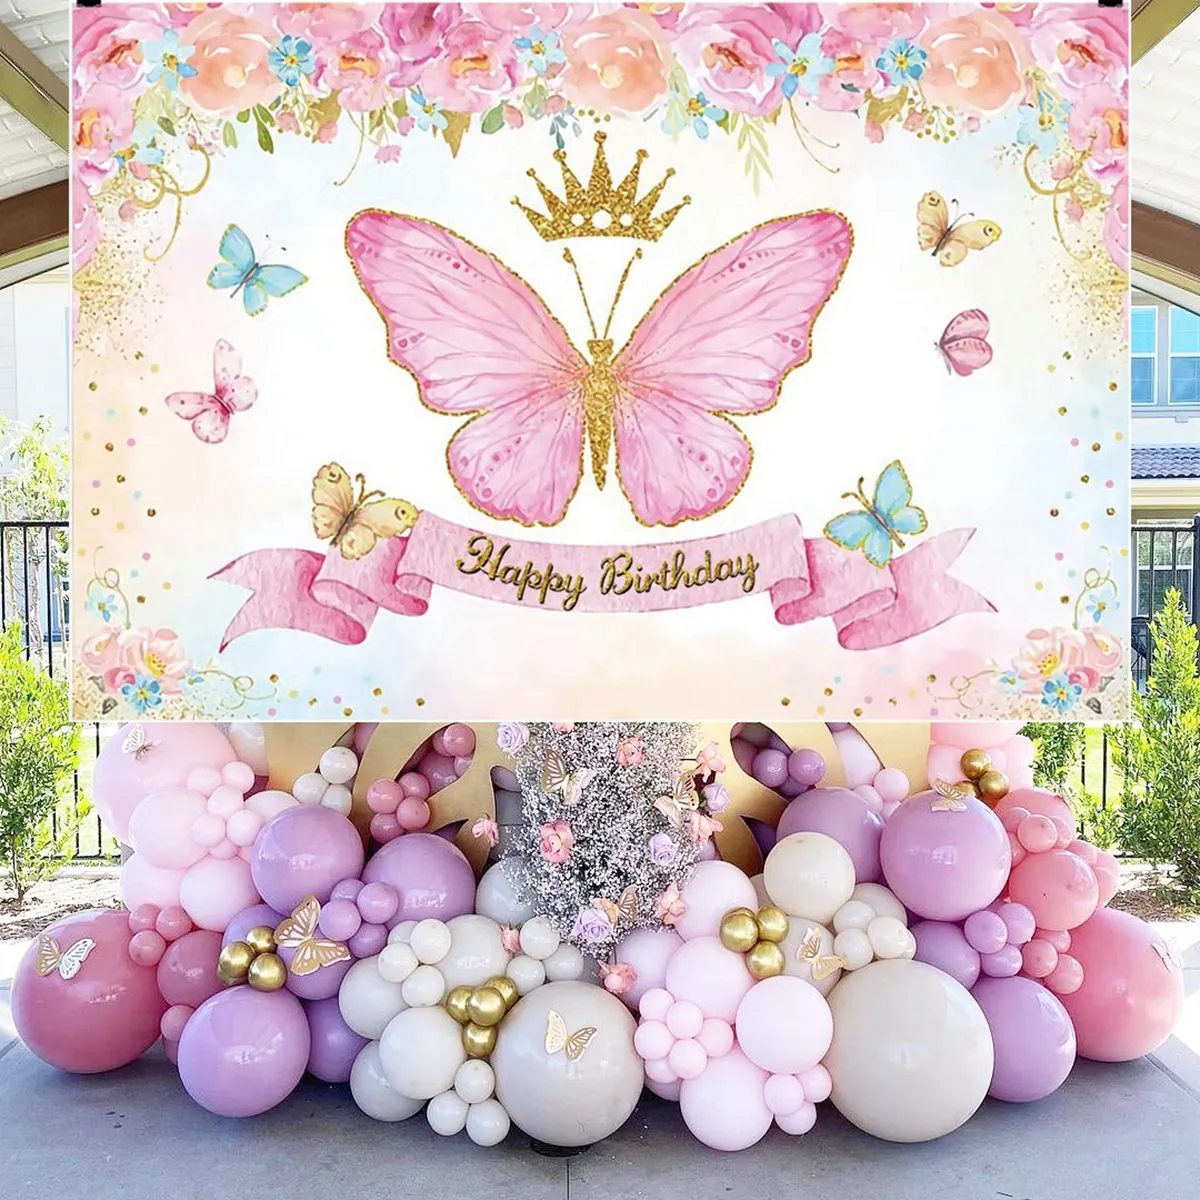 Happy Birthday Butterfly Themed Backdrops Party Decorations Background Party Suppliers Happy Birthday Backdrops For Party Kids